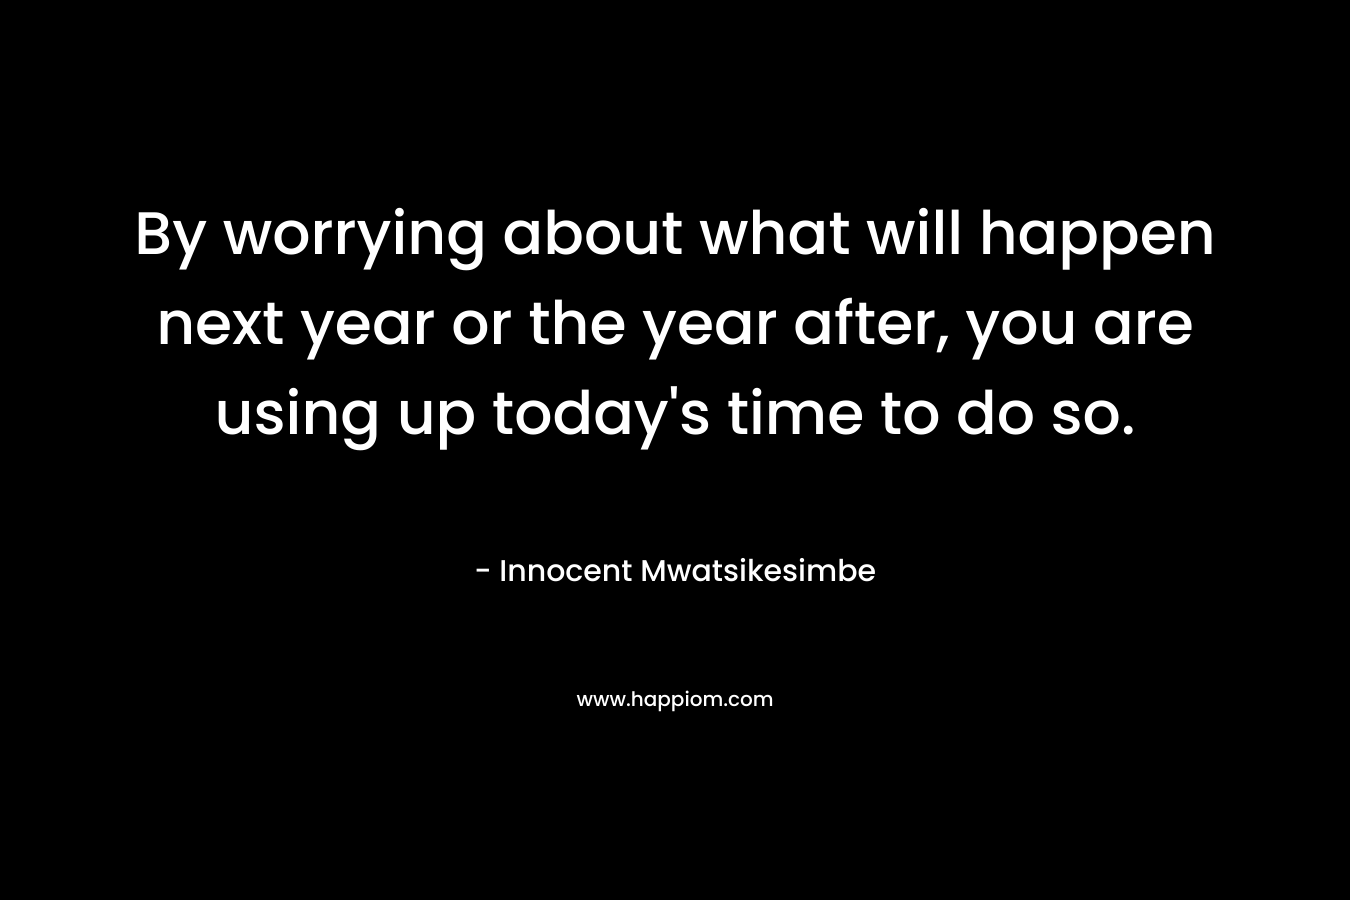 By worrying about what will happen next year or the year after, you are using up today's time to do so.